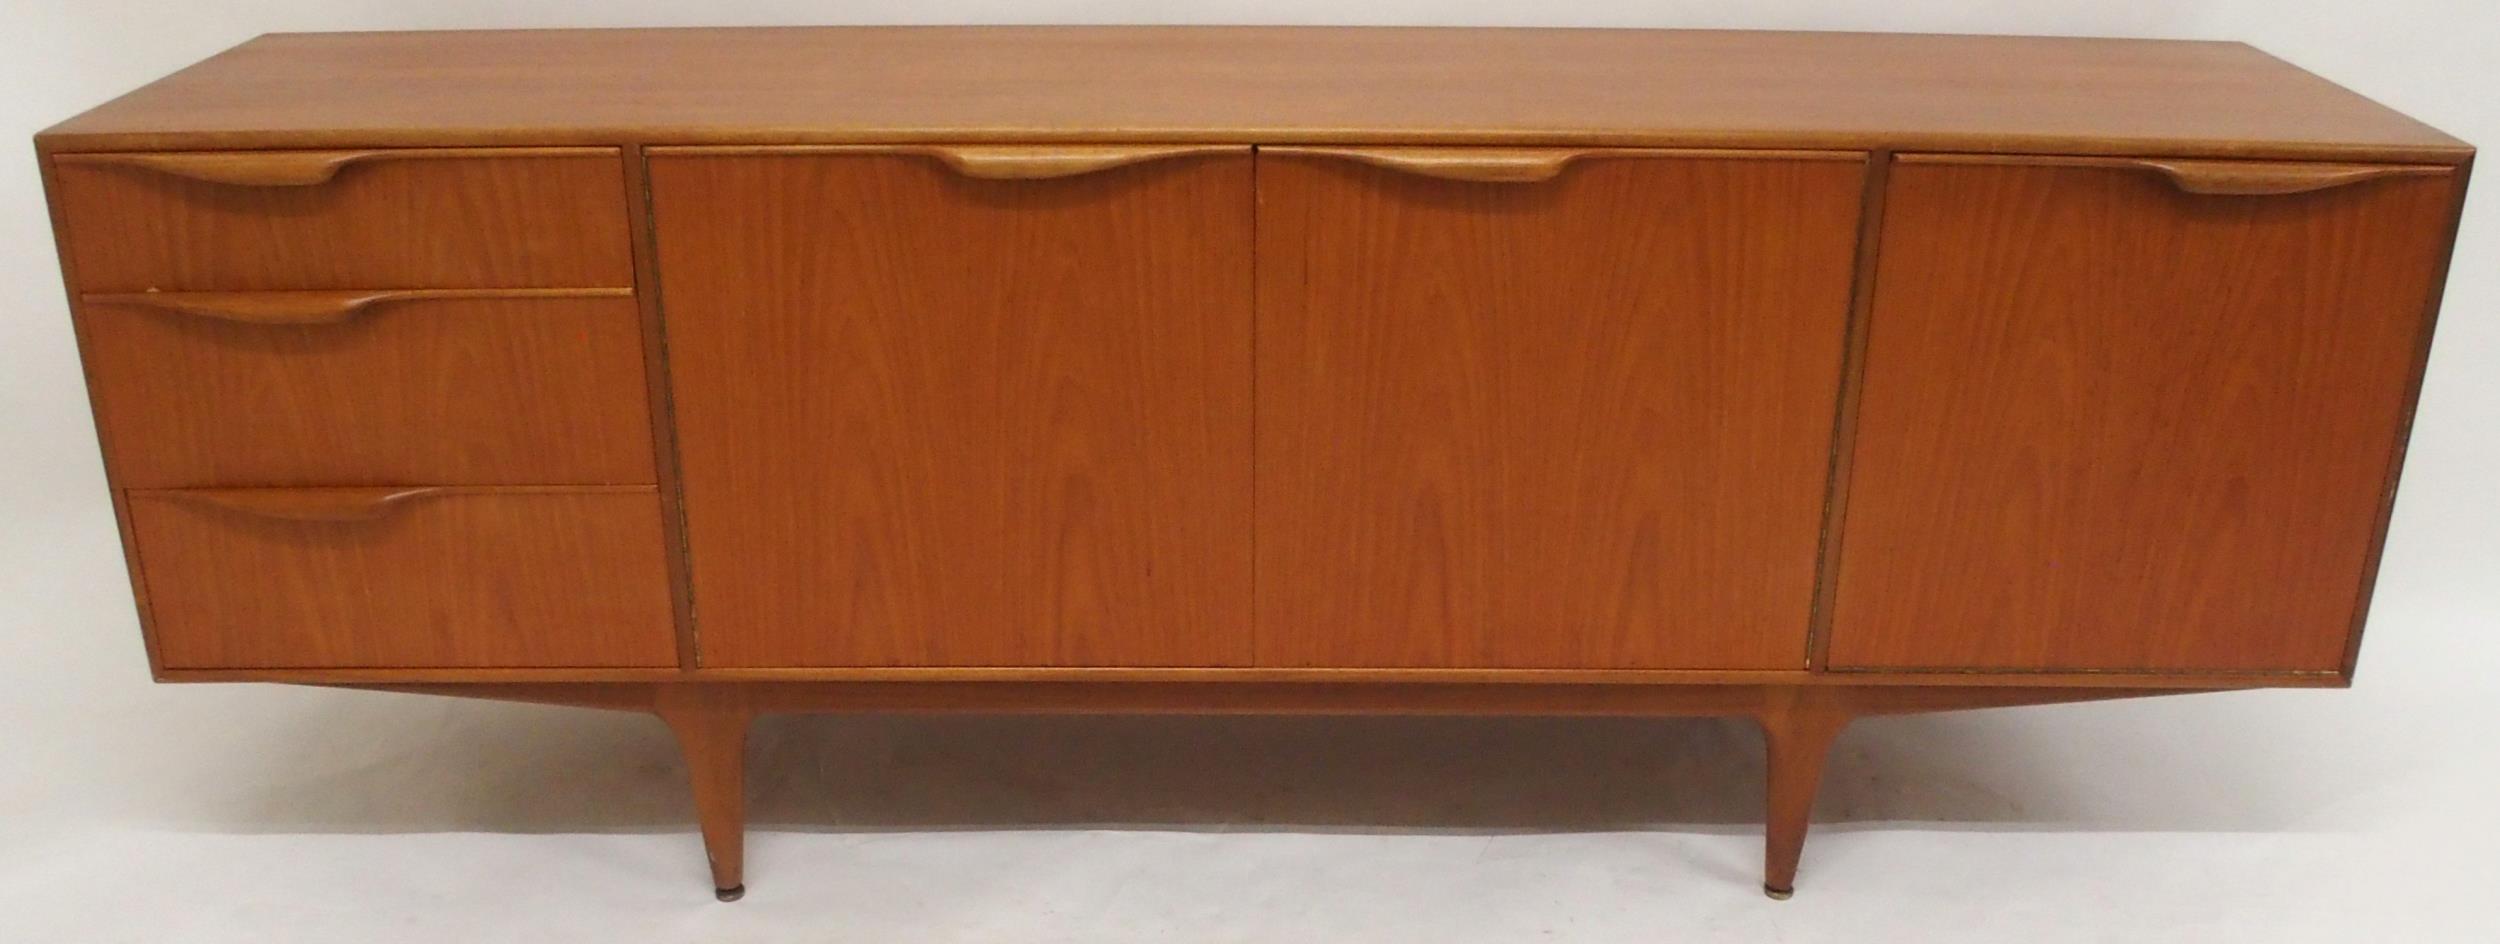 A MID 20TH CENTURY TEAK A.H. MCINTOSH OF KIRKCALDY SIDEBOARD with pair of cabinet doors flanked by